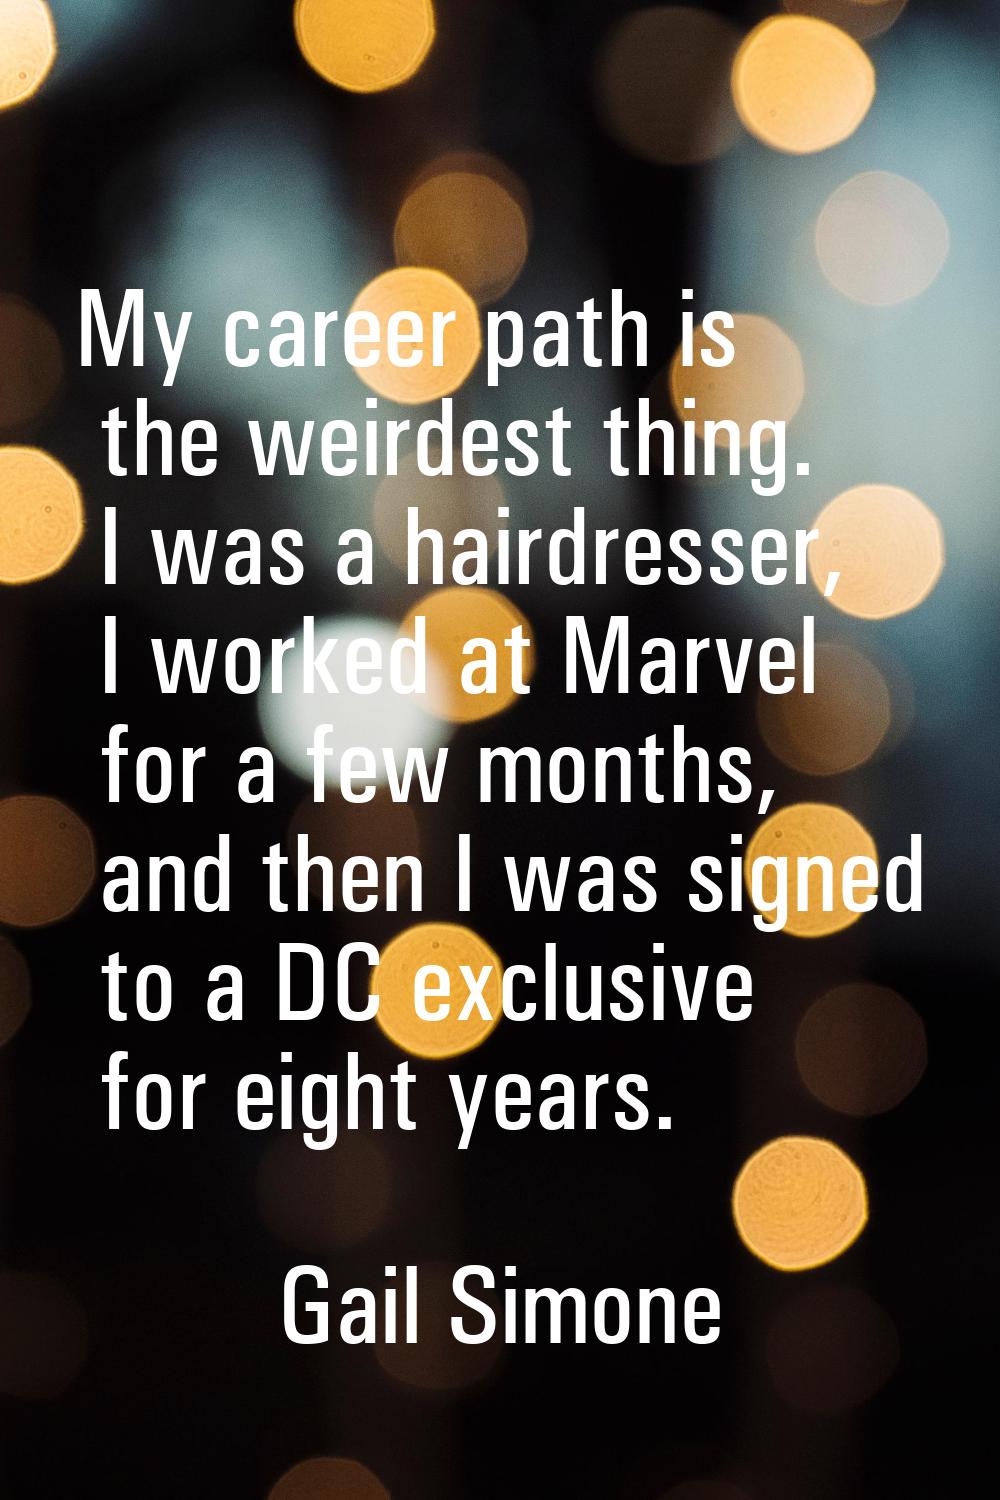 My career path is the weirdest thing. I was a hairdresser, I worked at Marvel for a few months, and